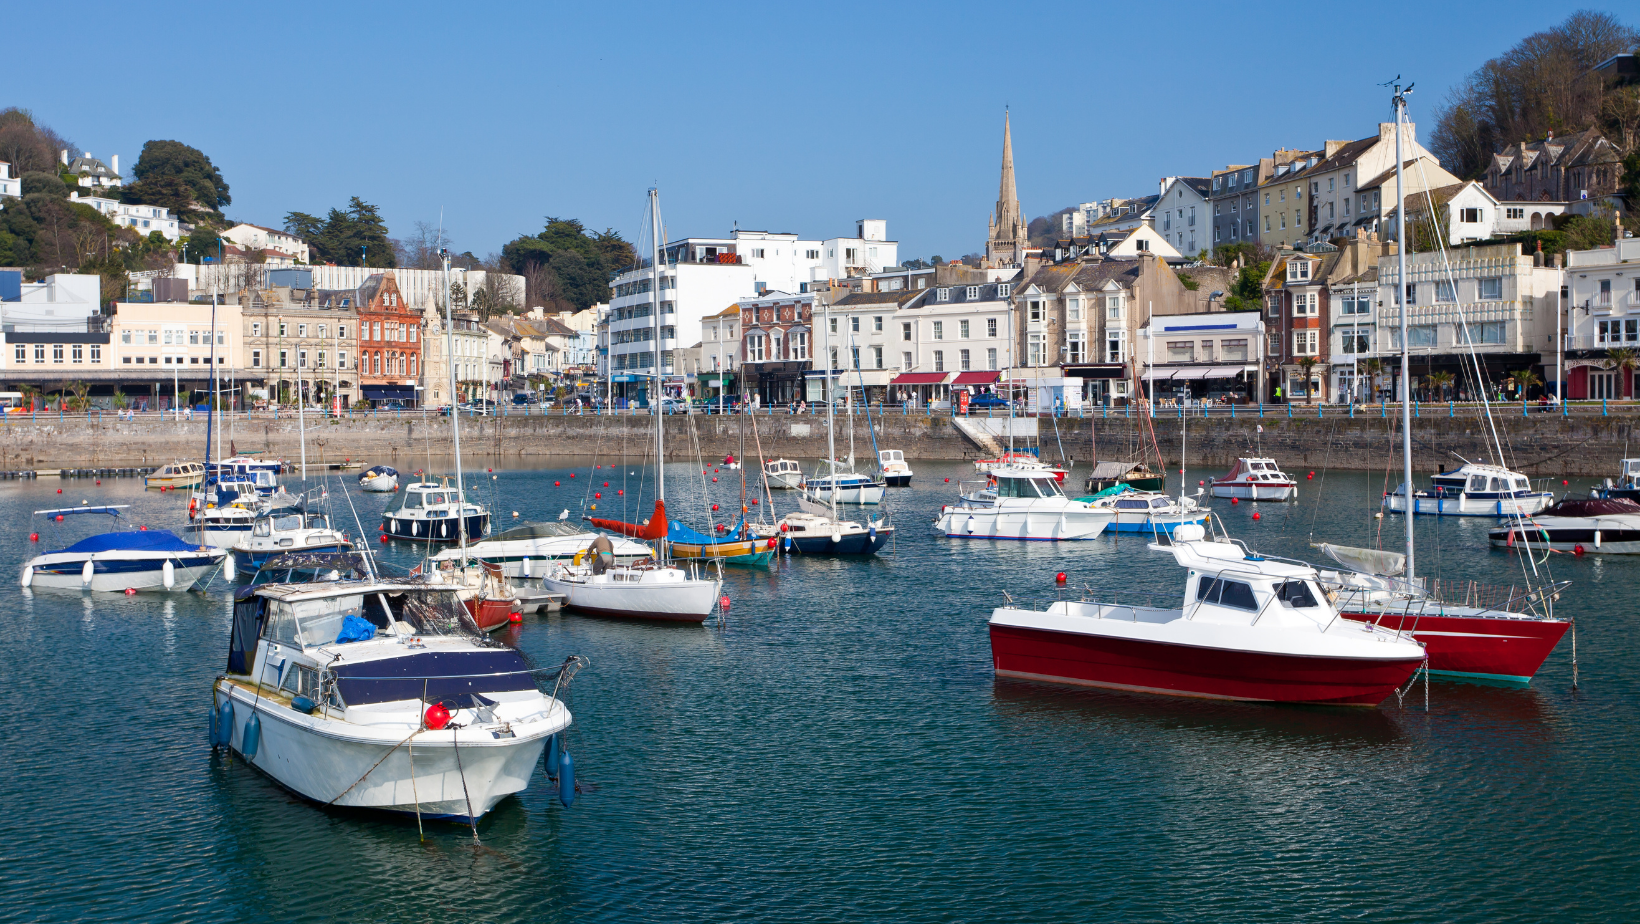 Holidays in Torquay and Torbay